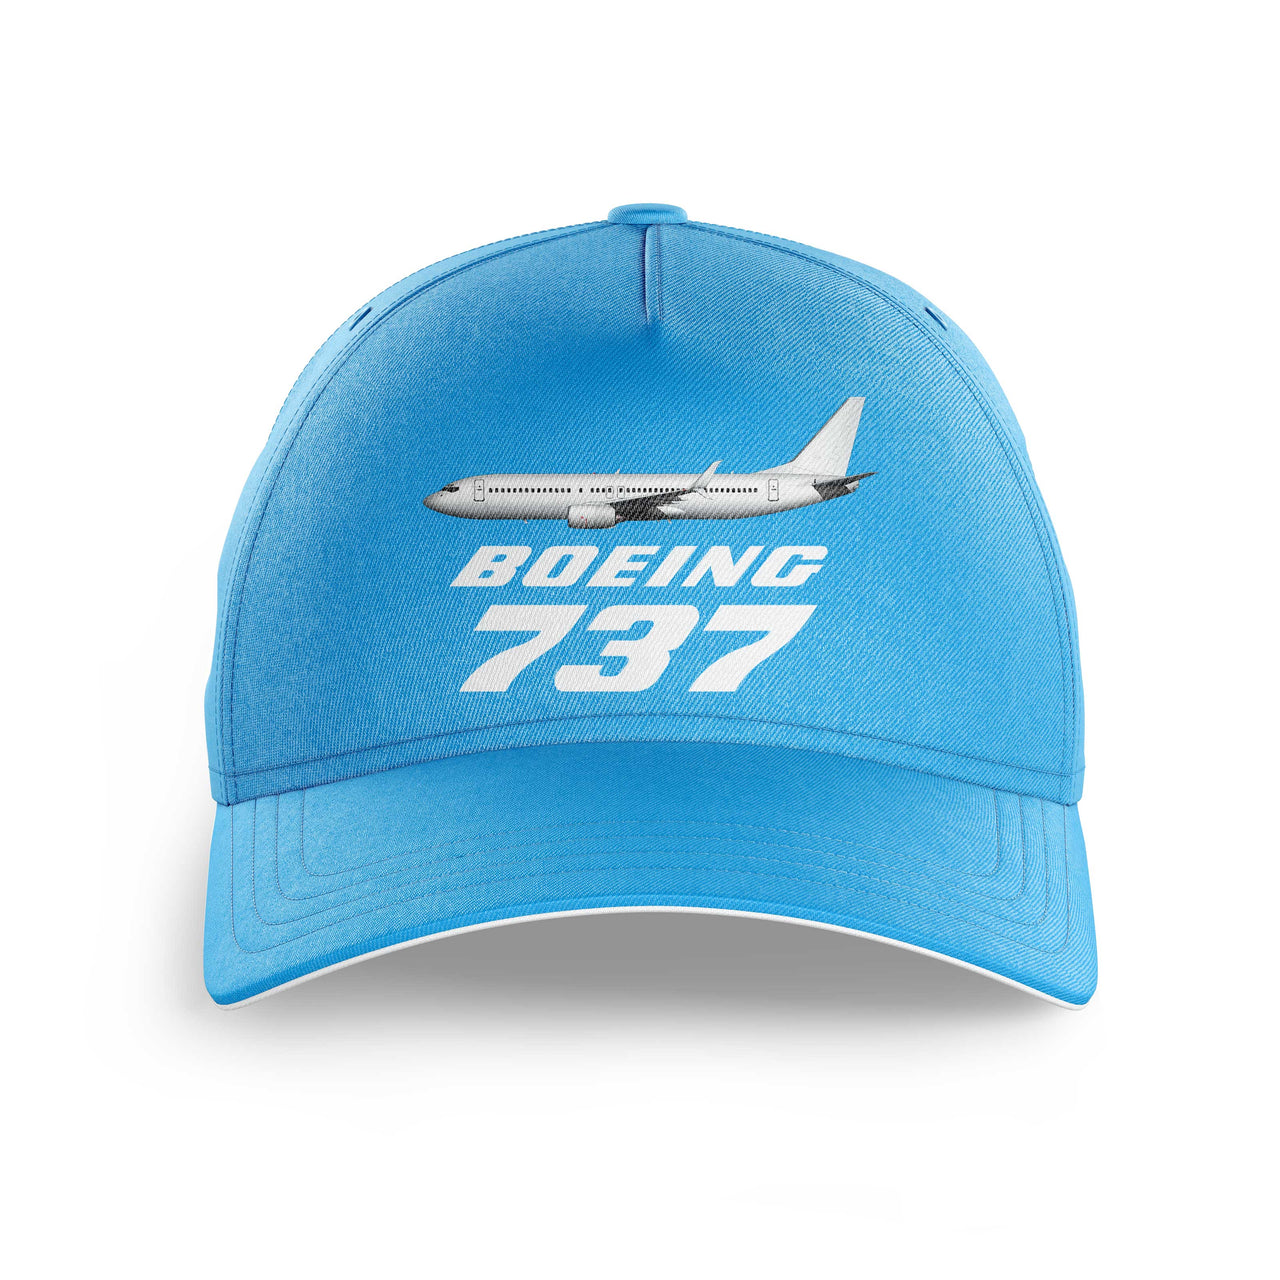 The Boeing 737 Printed Hats